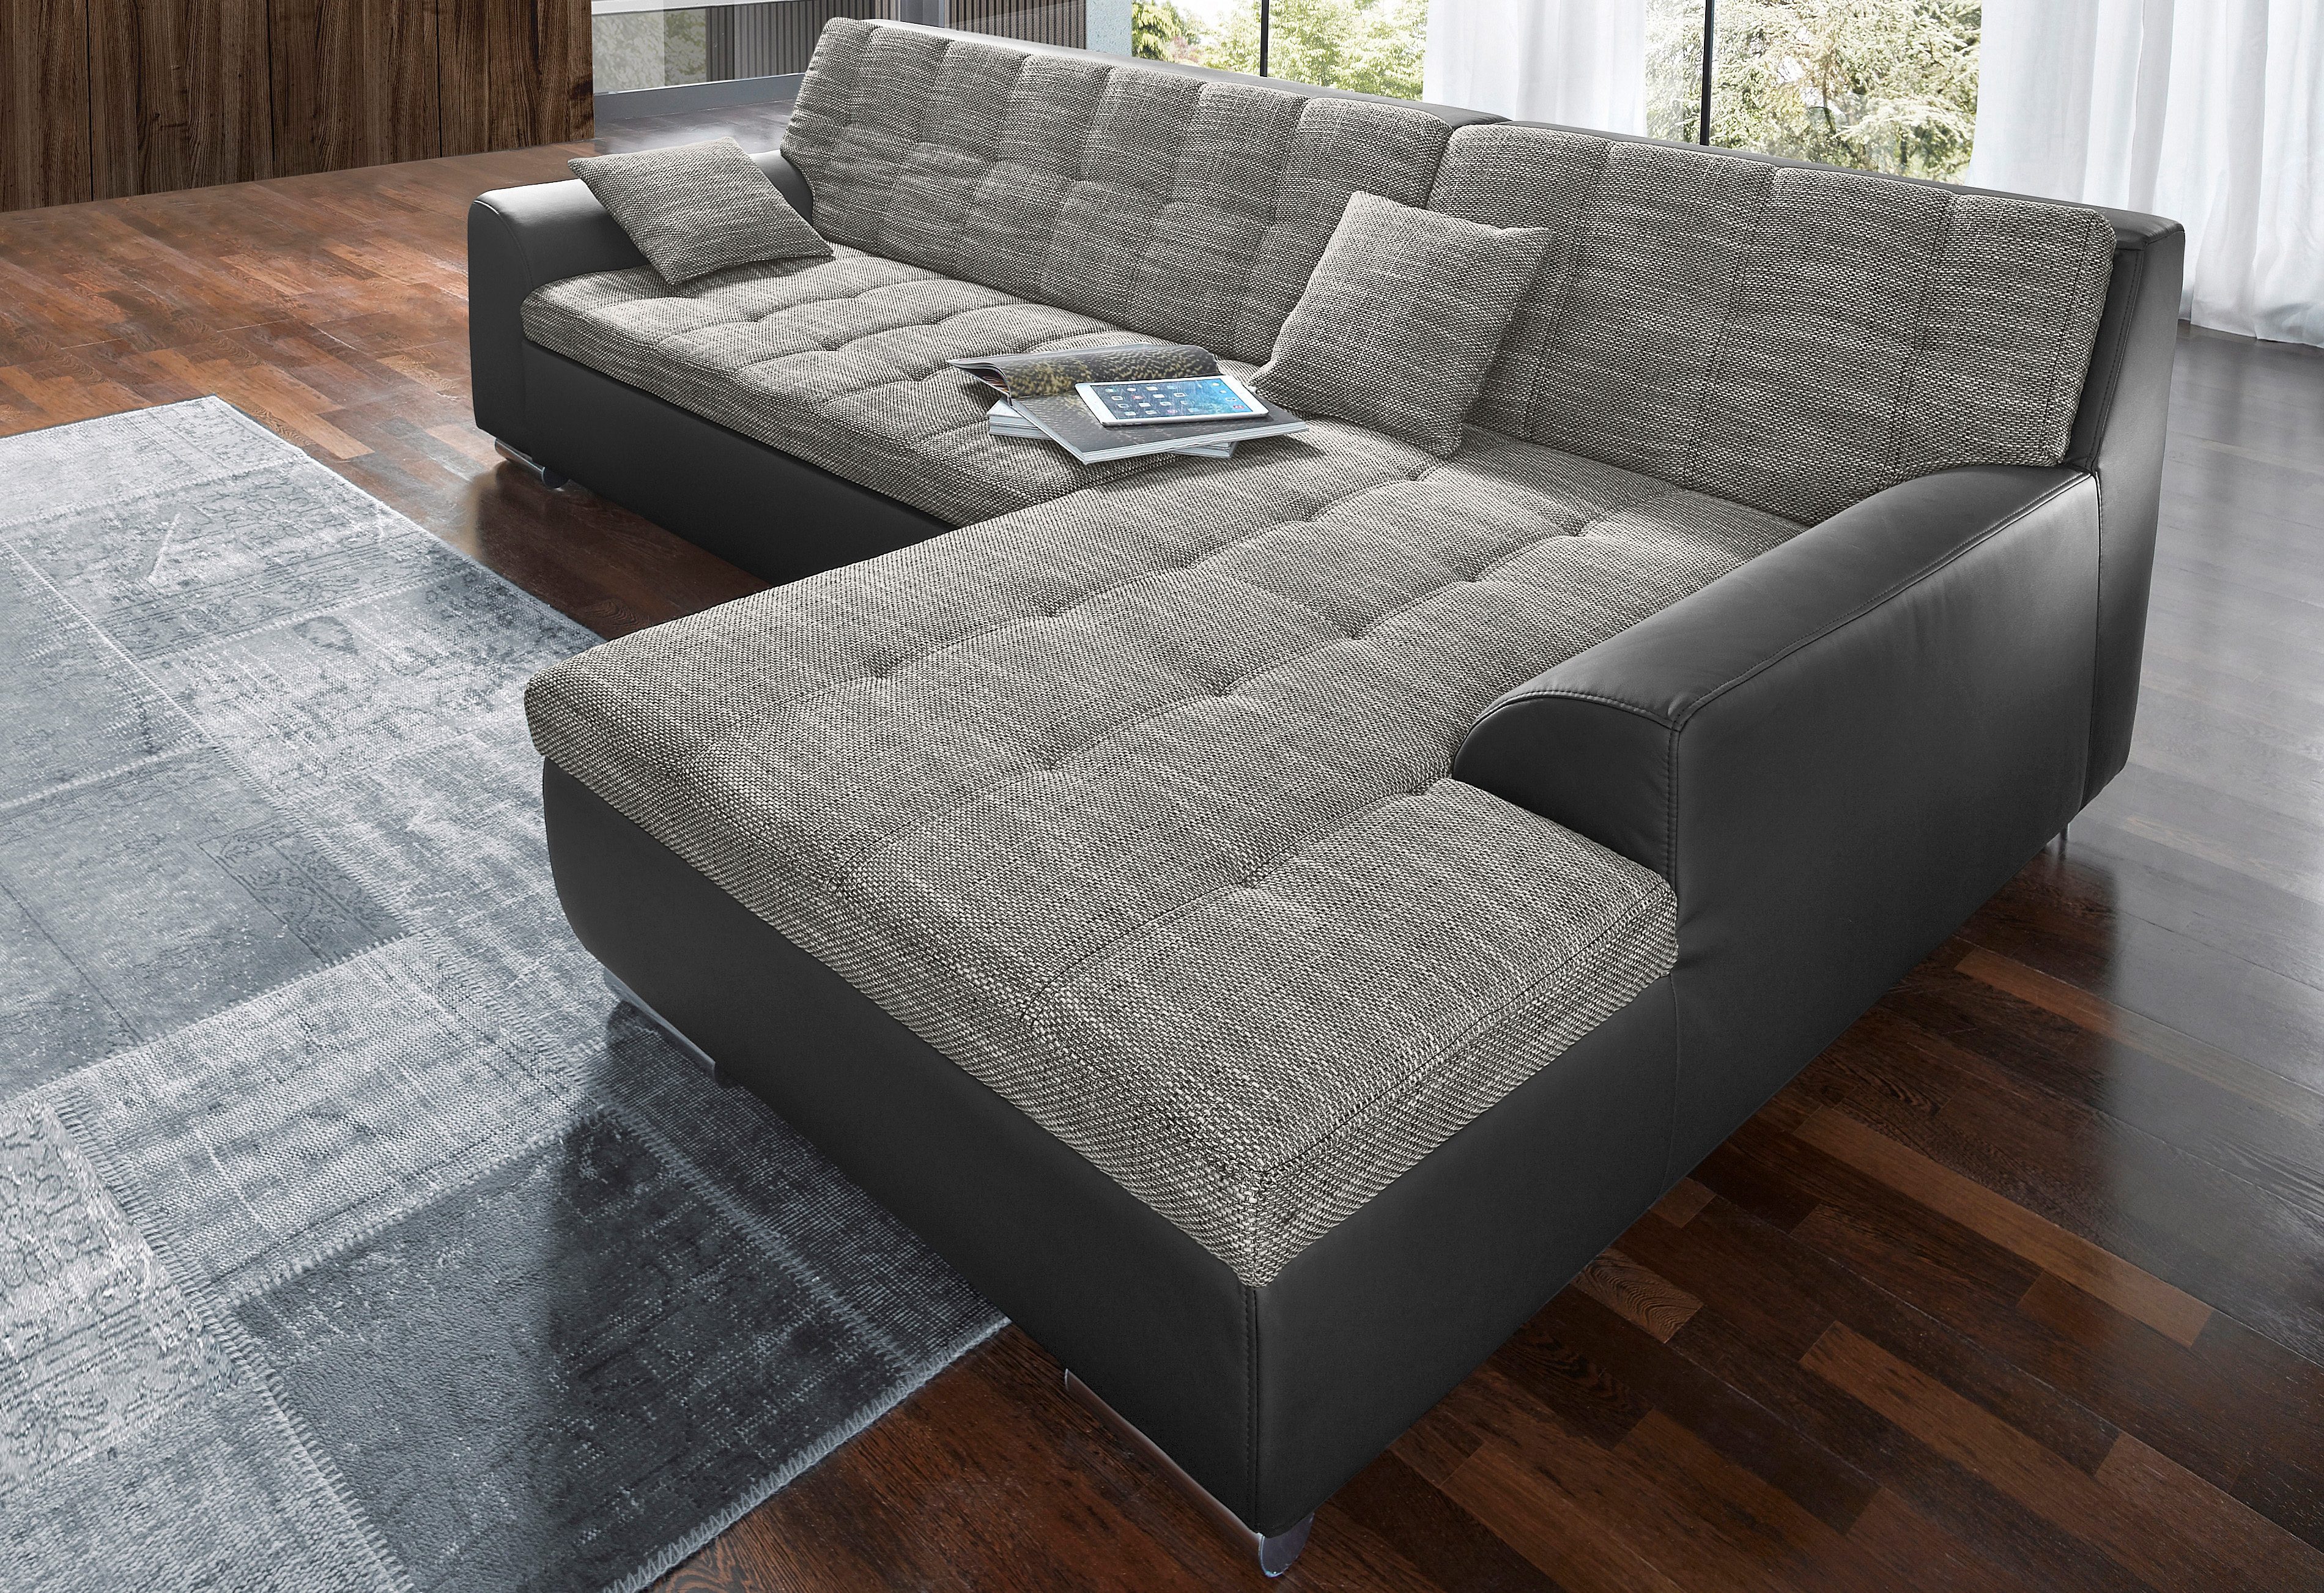 DOMO collection Ecksofa Treviso Top, wahlweise mit Bettfunktion